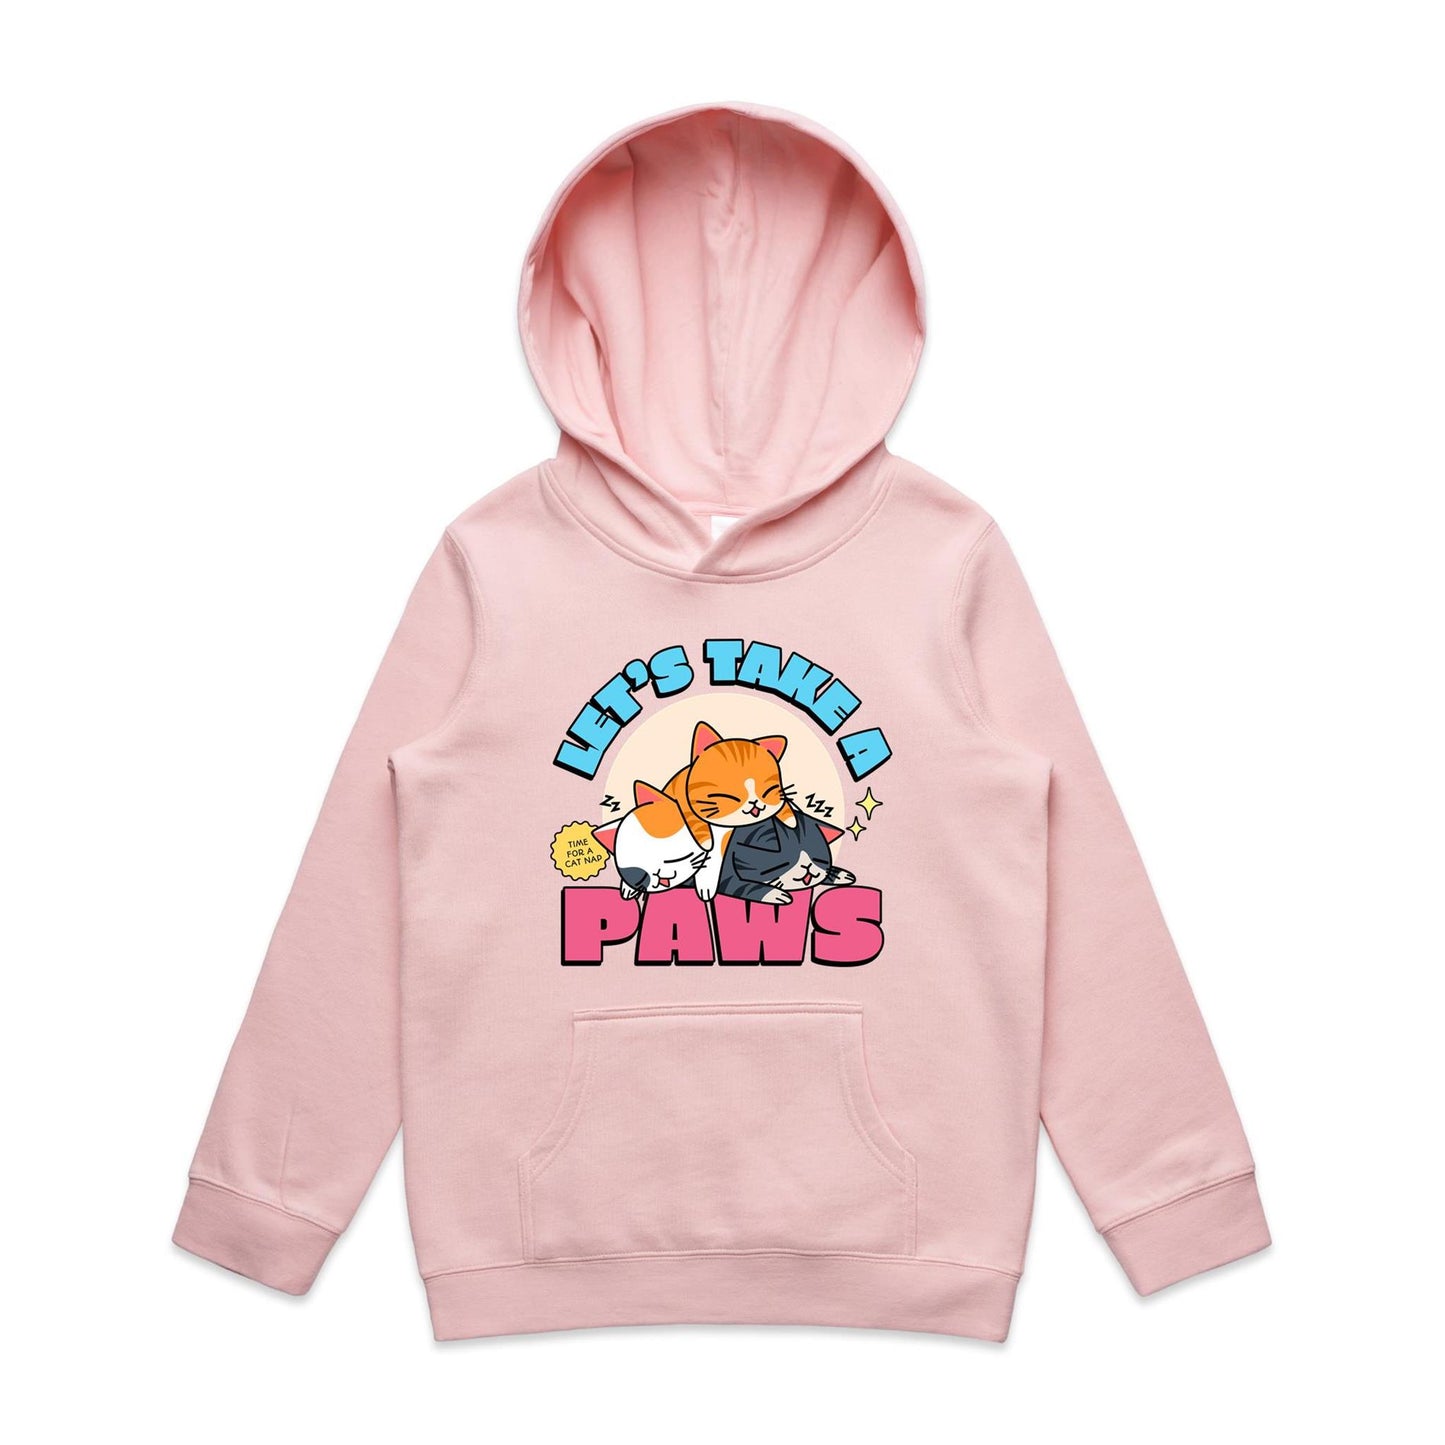 Let's Take A Paws, Time For A Cat Nap - Youth Supply Hood Pink Kids Hoodie animal